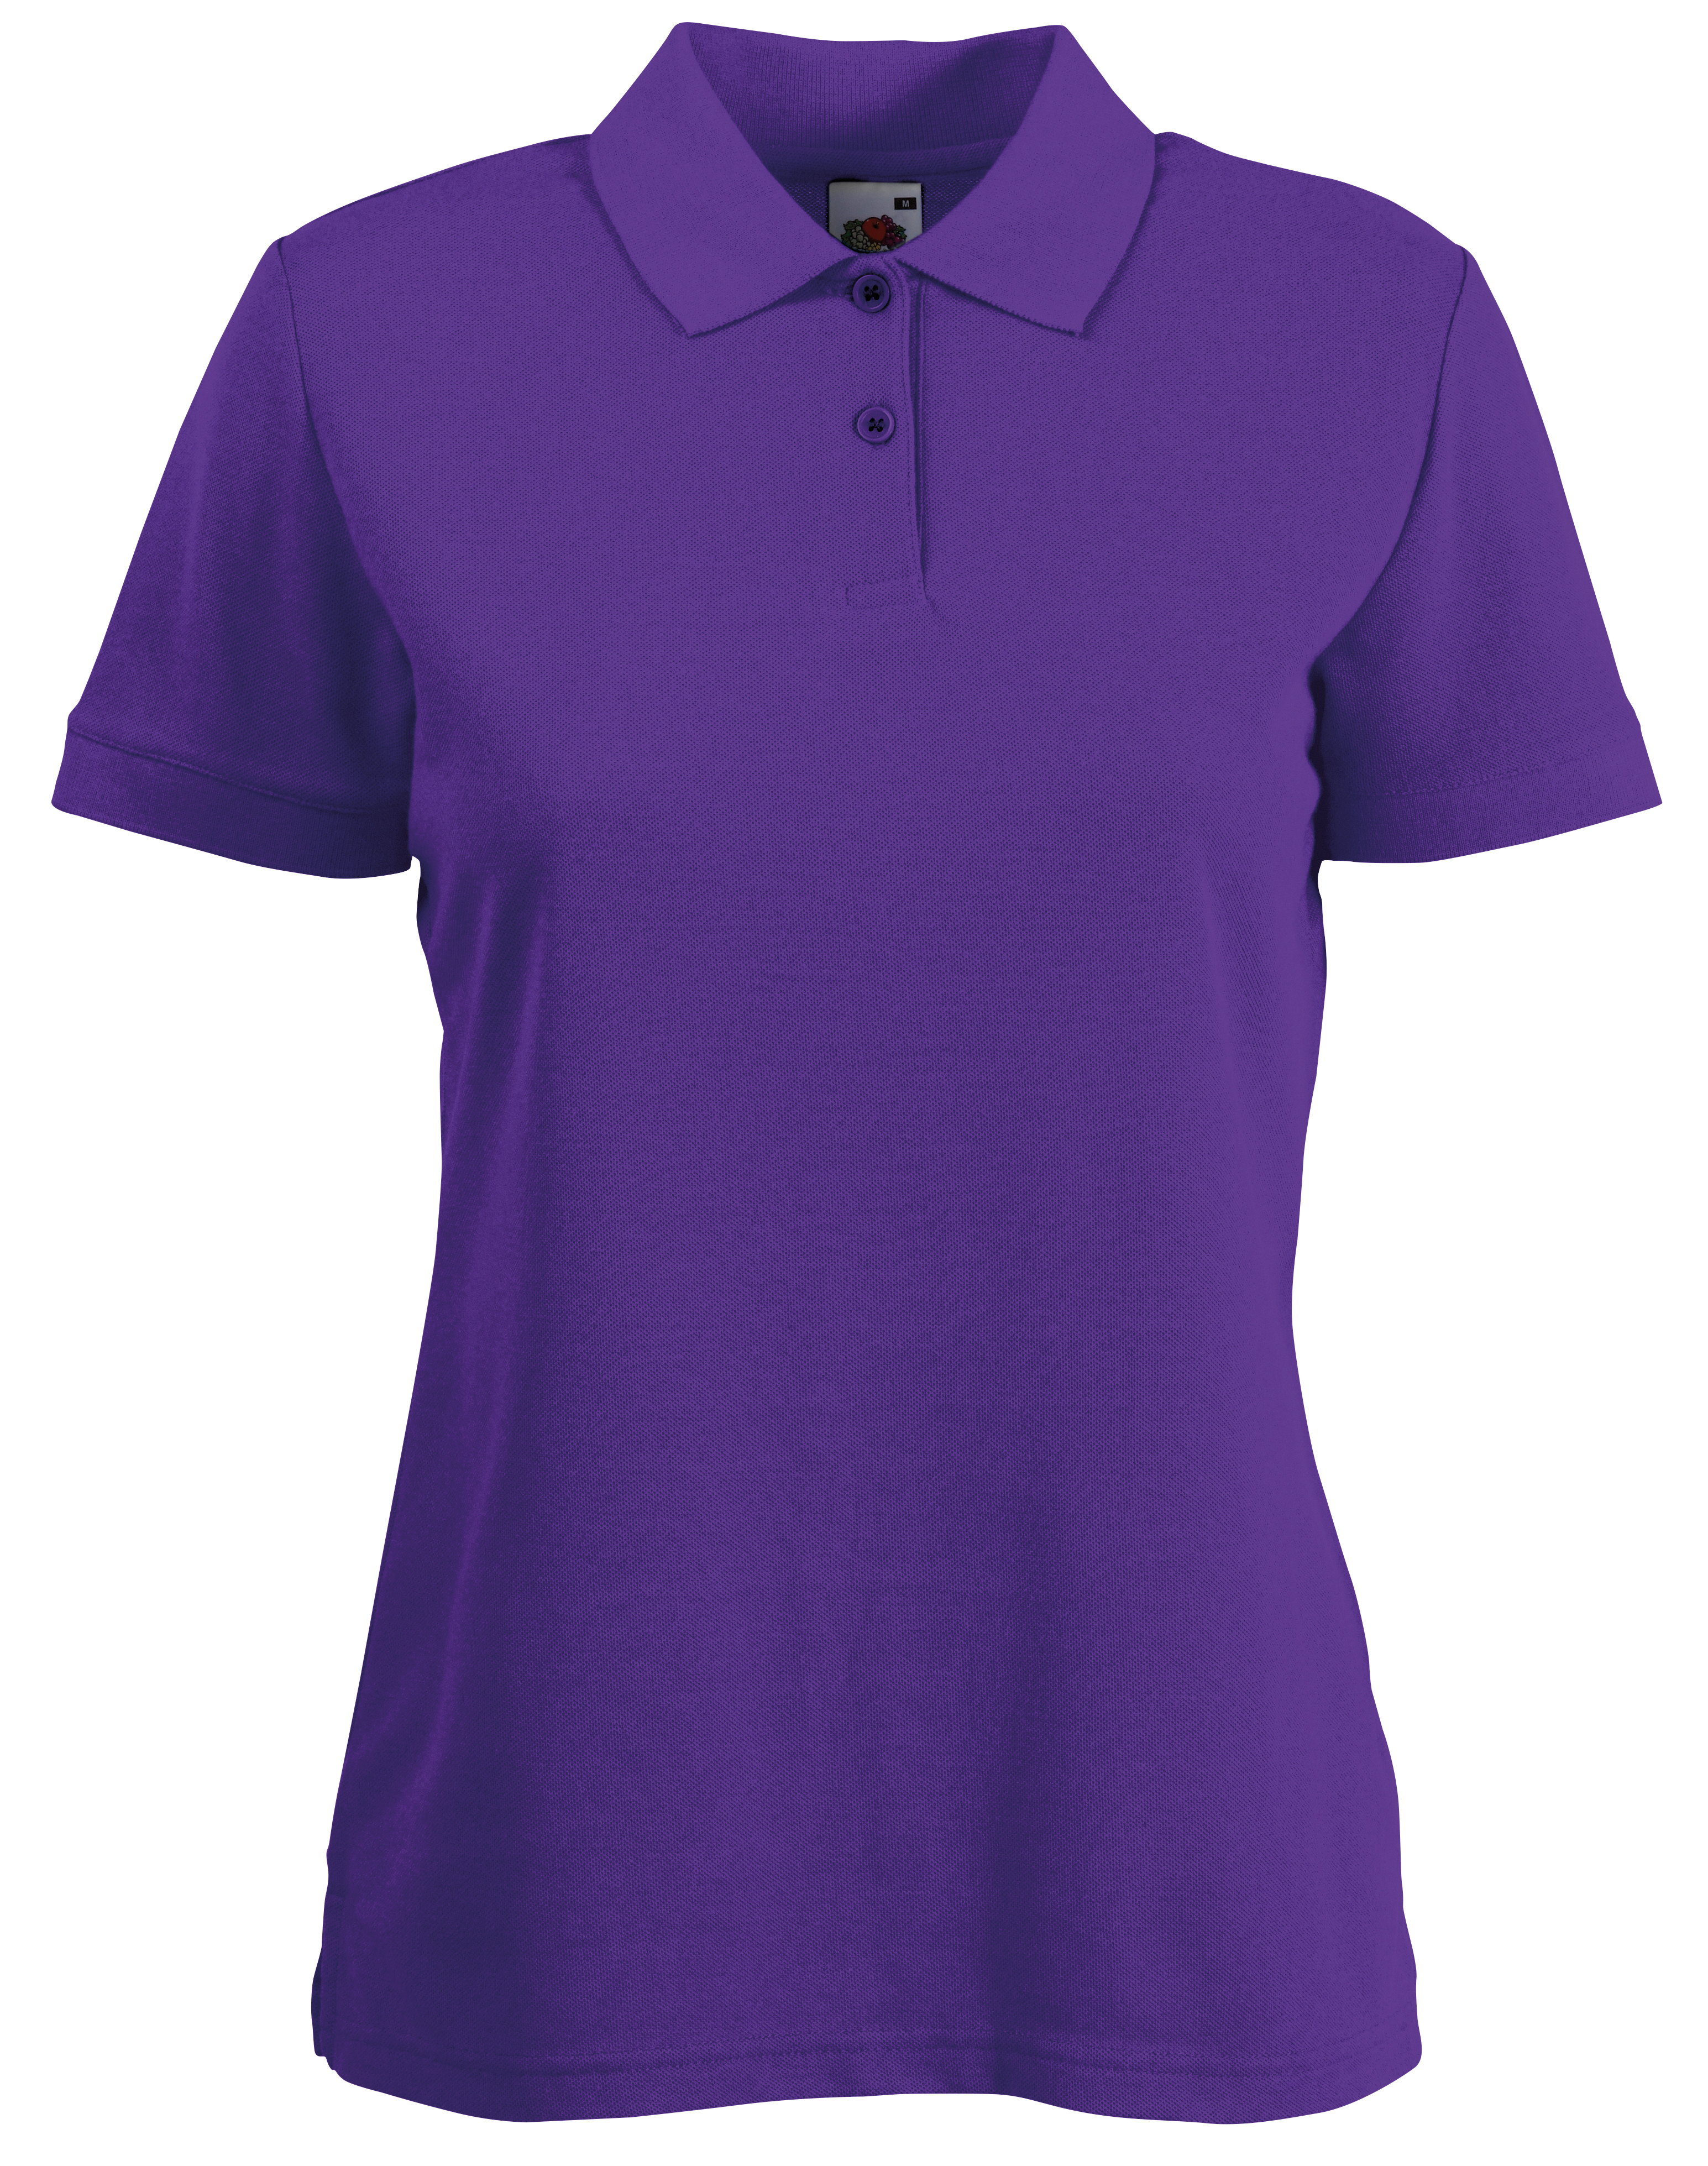 ax-httpswebsystems.s3.amazonaws.comtmp_for_downloadfruit-of-the-loom-ladies-65-35-polo-purple.jpg